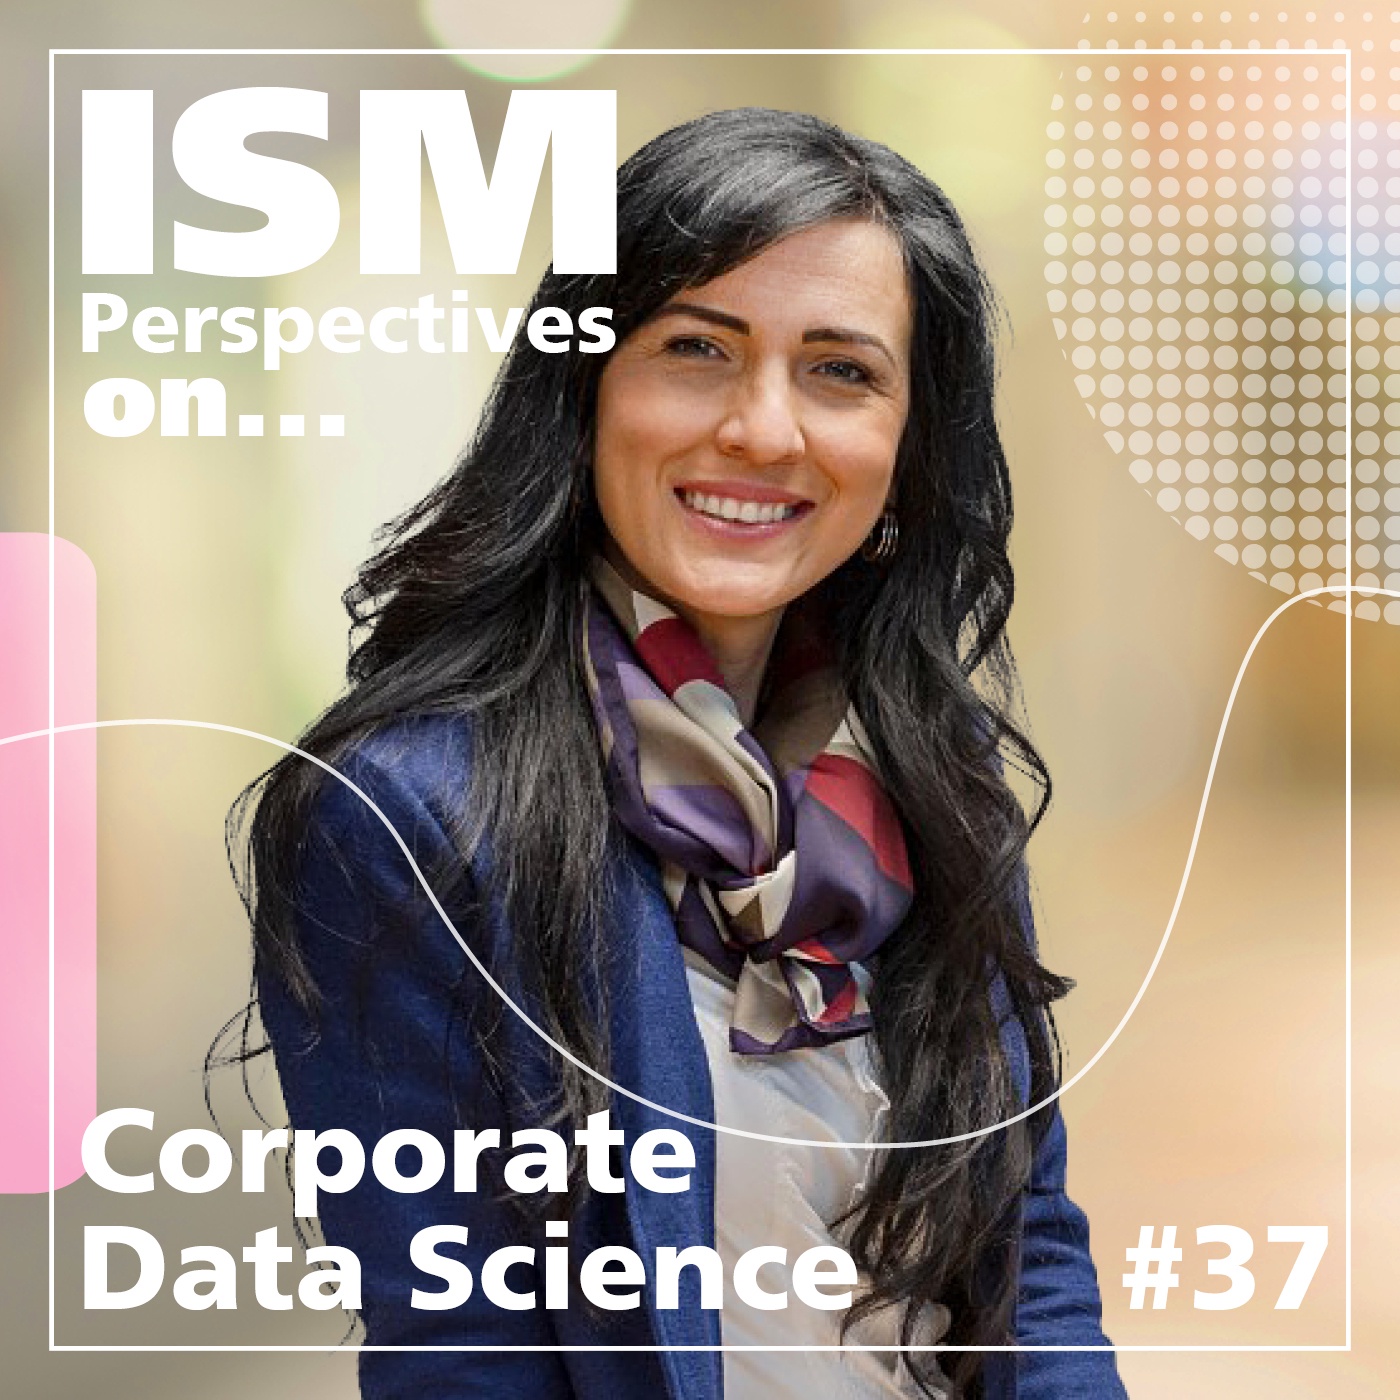 Perspectives on: Corporate Data Science